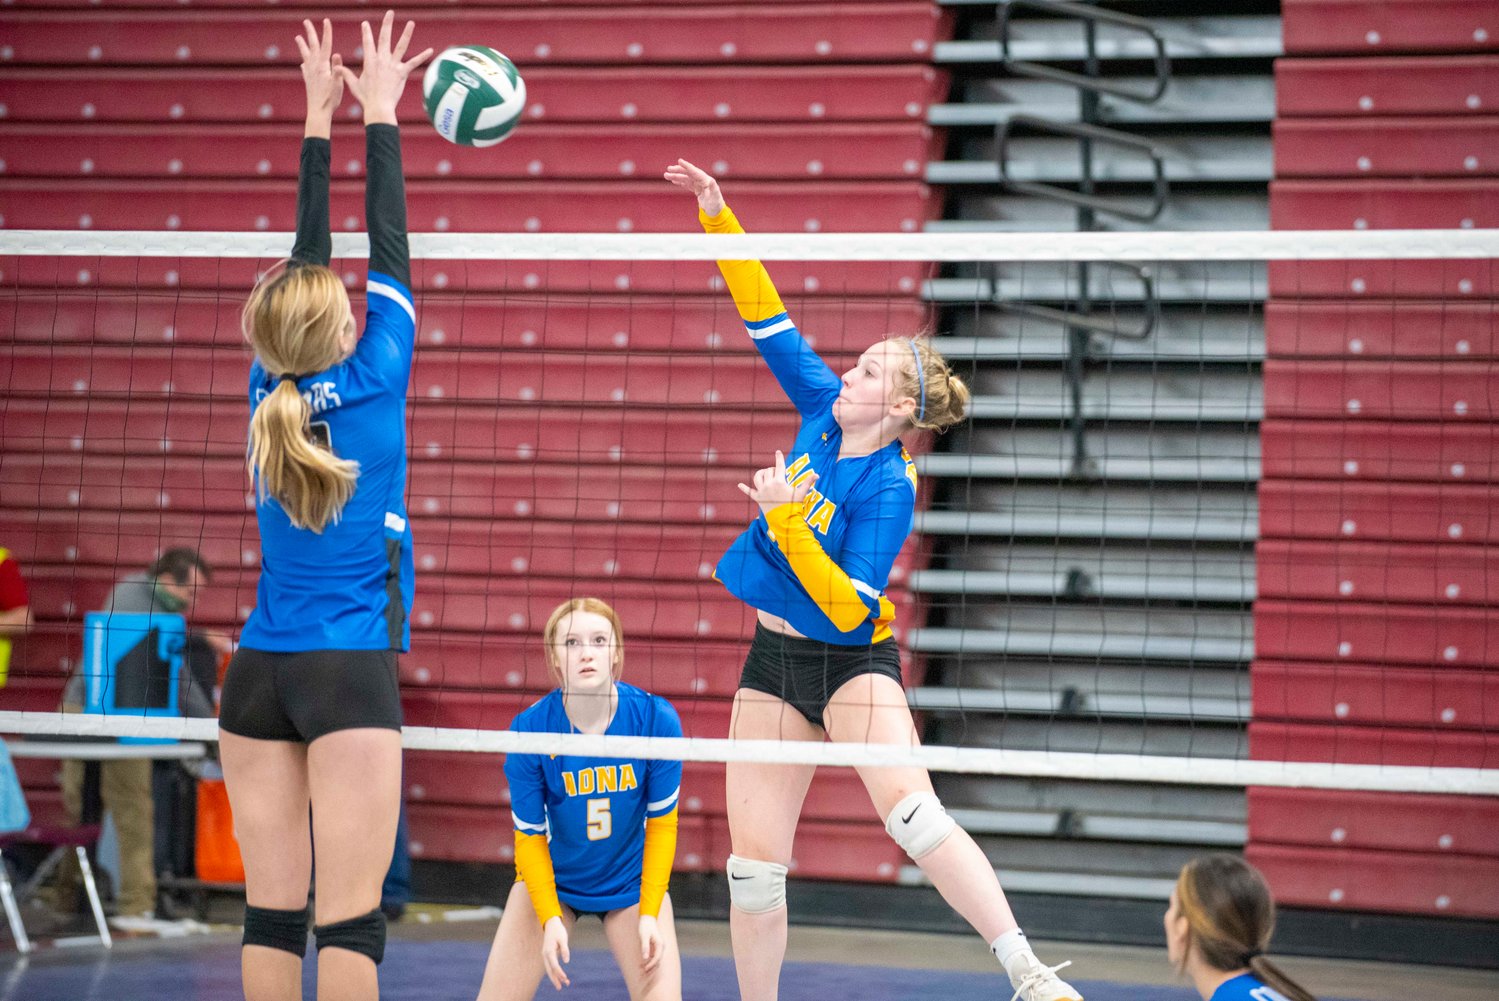 Adna’s Kendall Humphrey (11) spikes against Warden in a loser-out match Thursday in Yakima